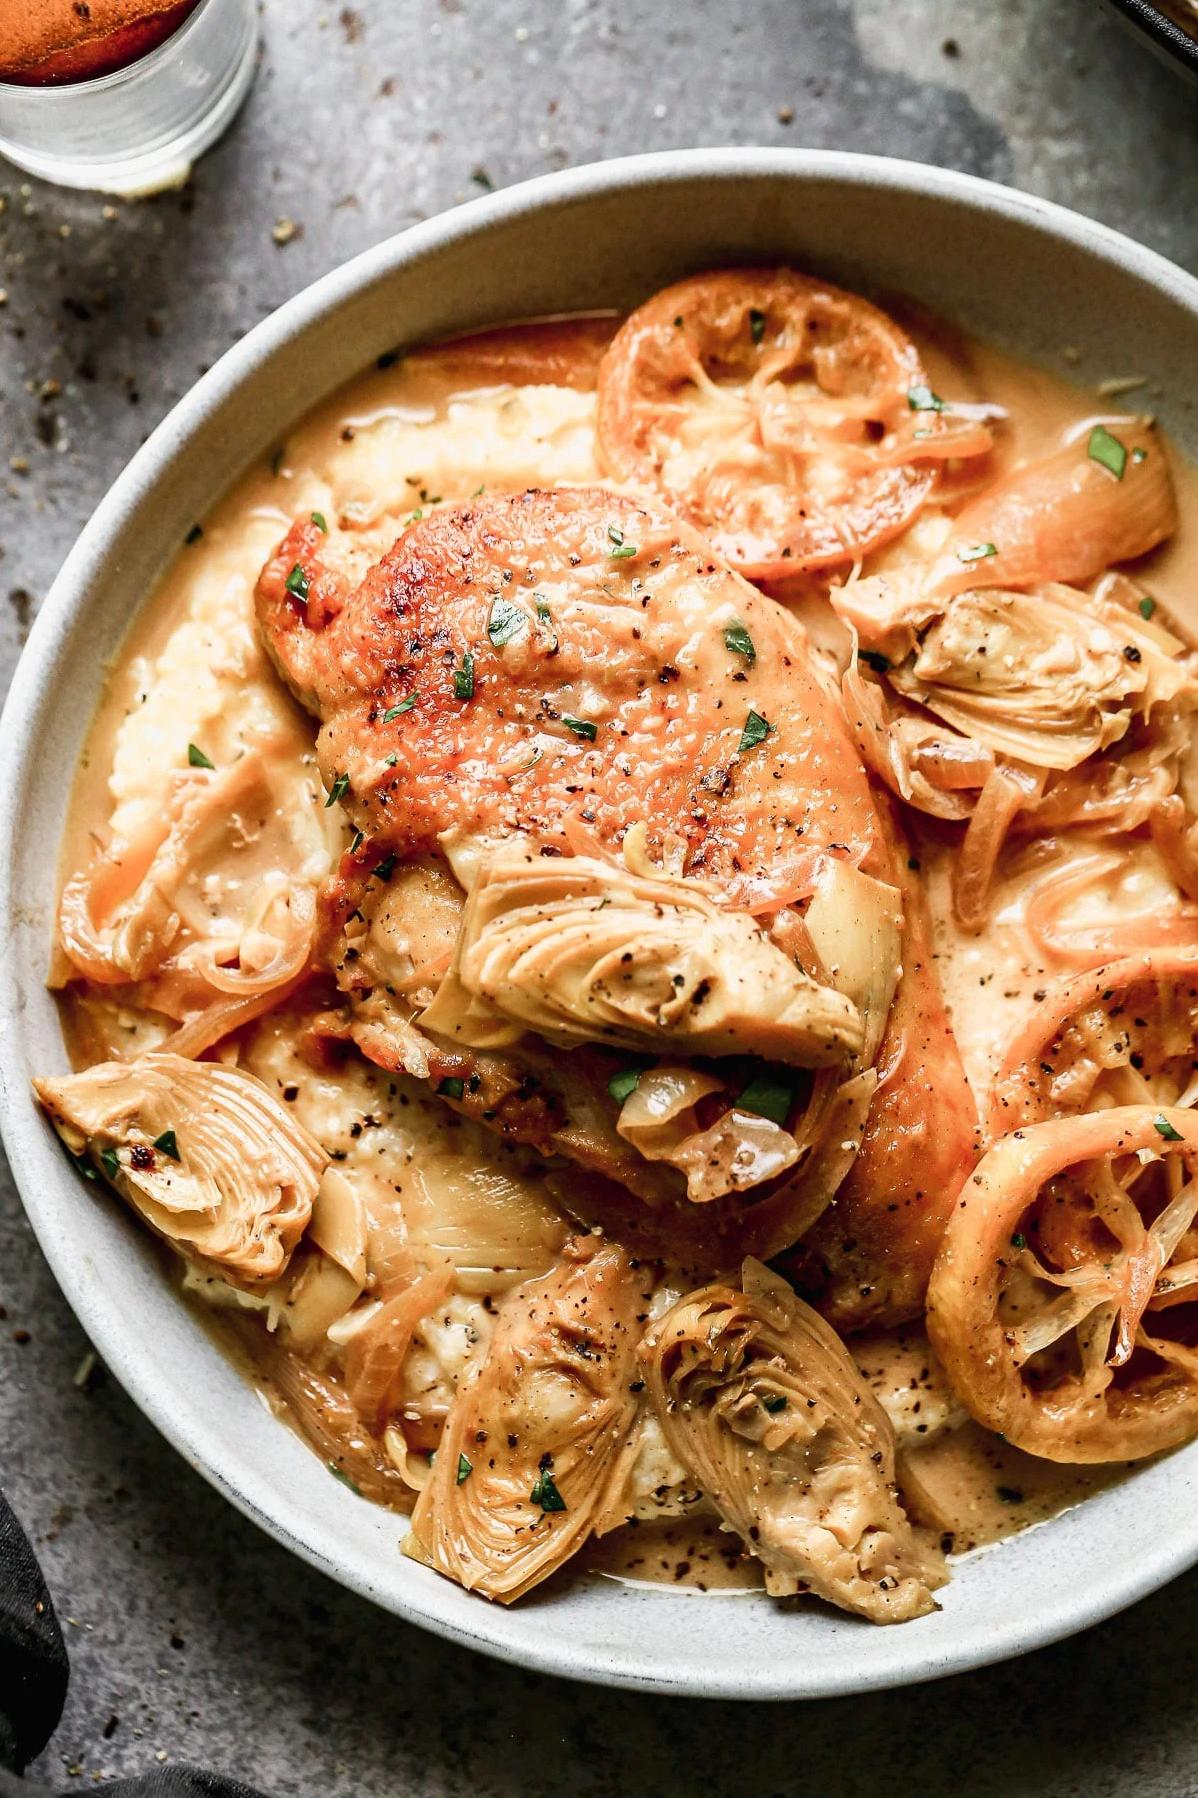  A marriage of tender chicken, artichokes, and a wine-infused sauce.